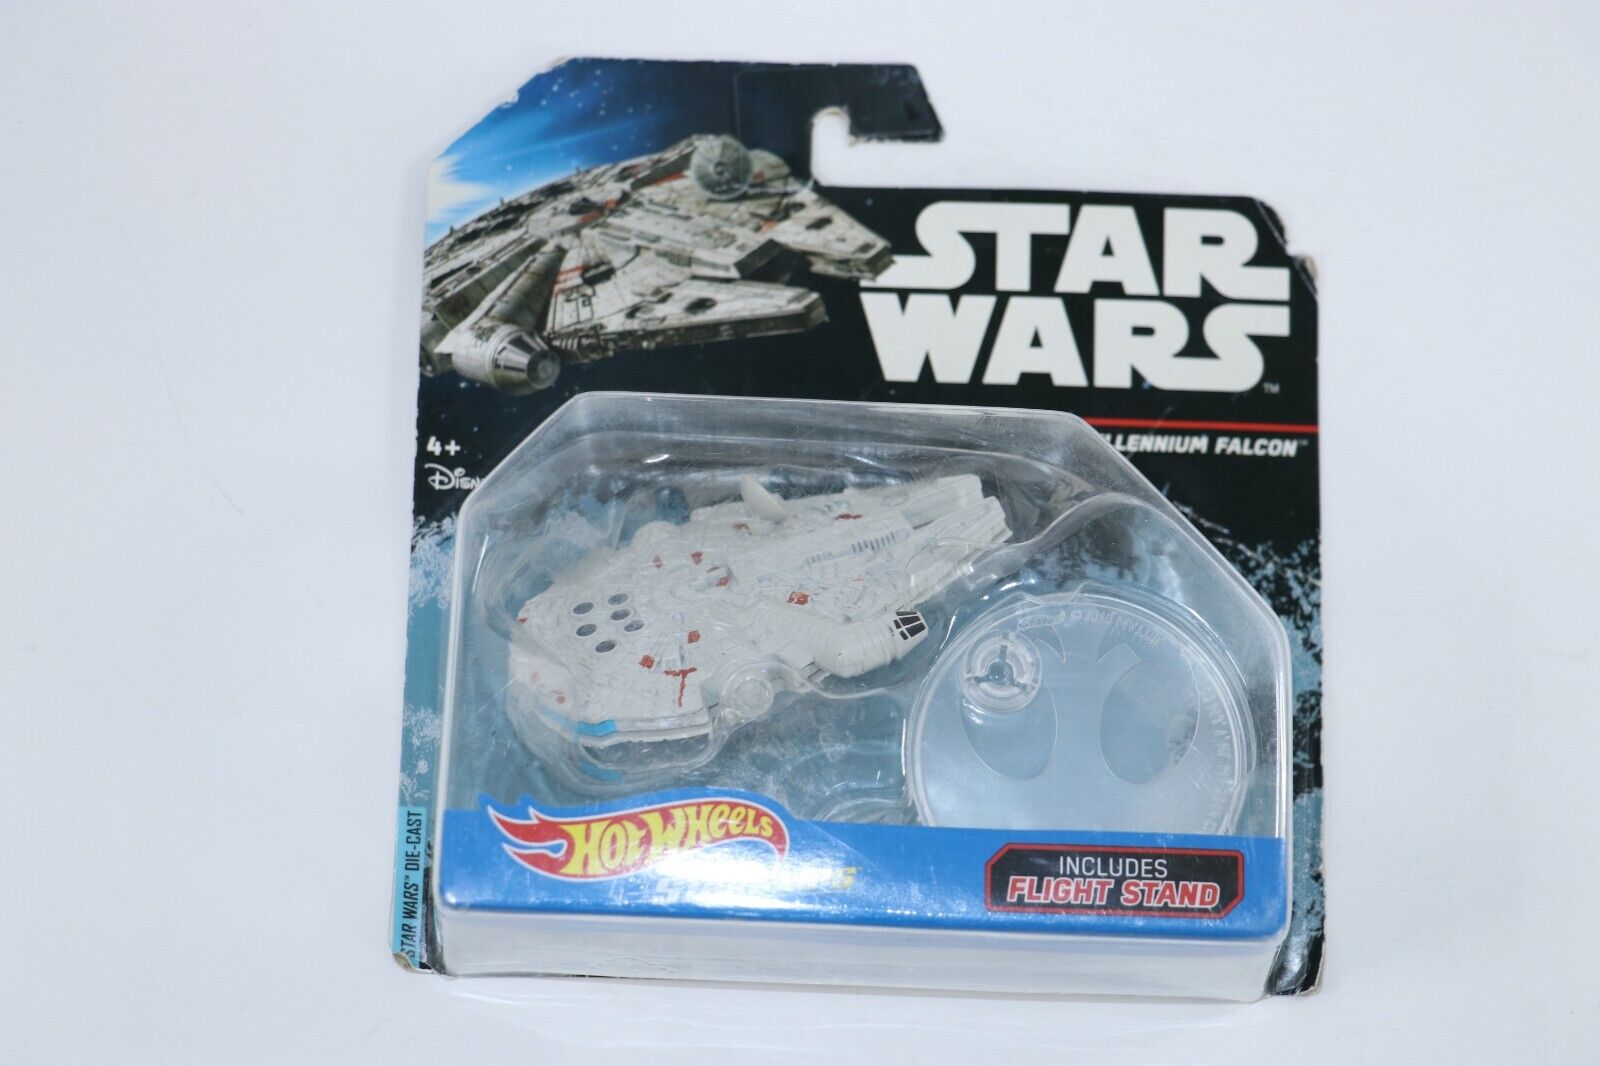 HOT WHEELS STAR WARS MILLENNIUM FALCON W/ STAND MATTEL NEW SEALED SHIPS BOXED